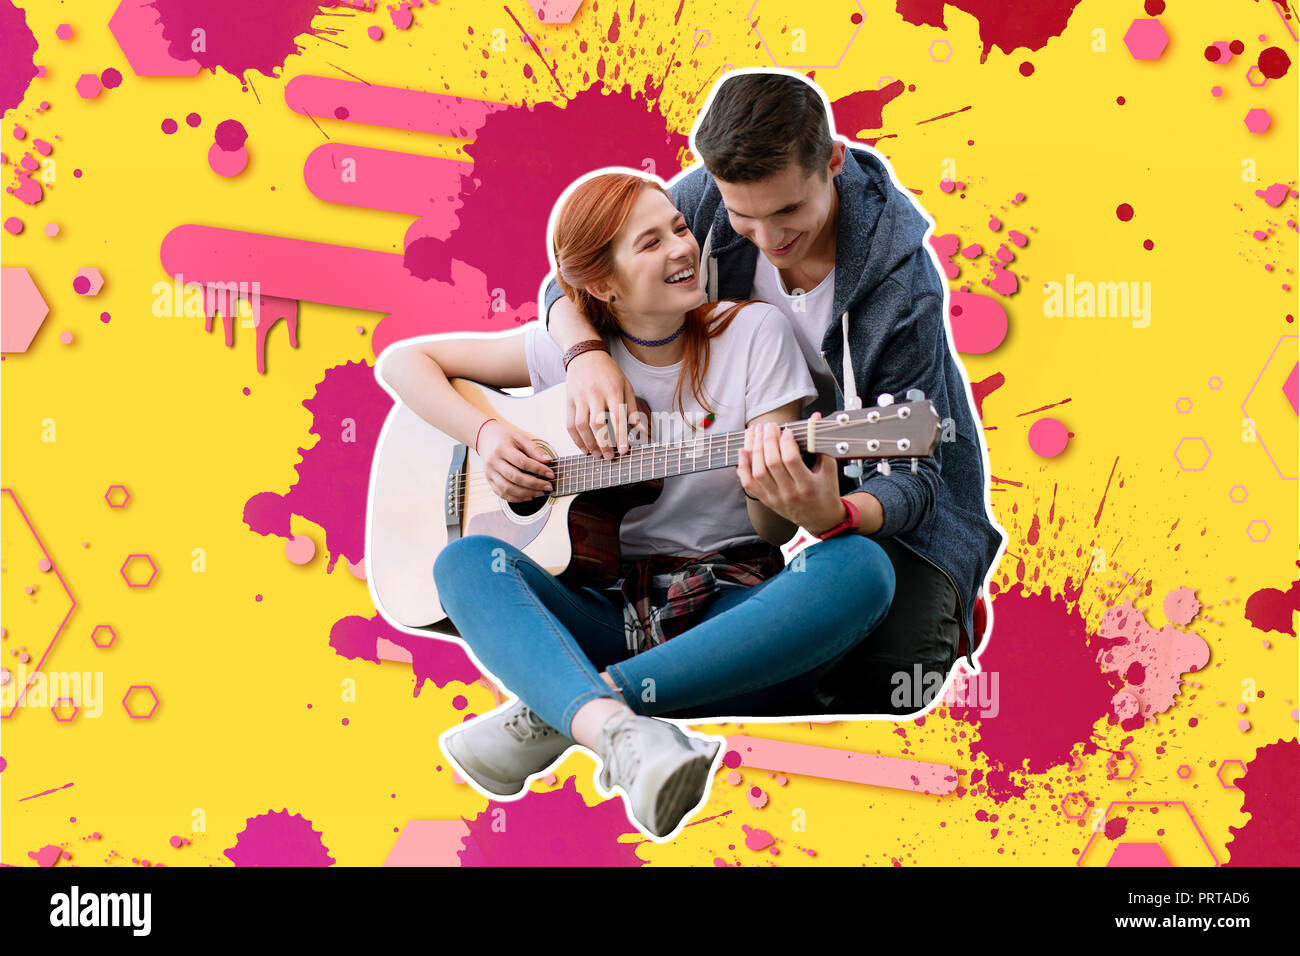 Happy red haired girl playing the guitar with her boyfriend and smiling Stock Photo